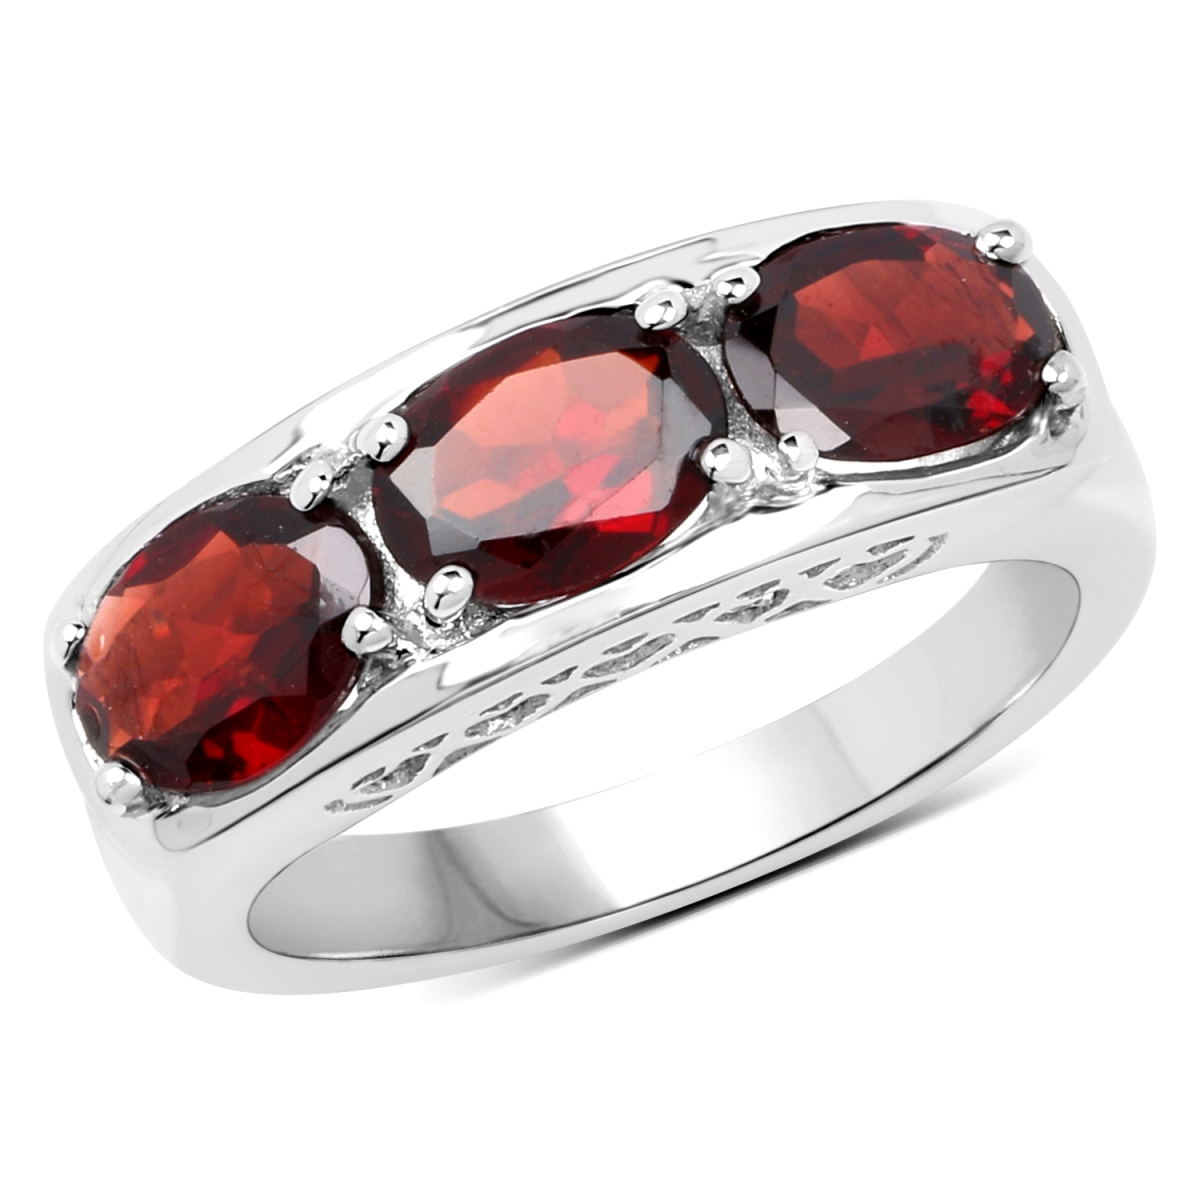 Picture of HauteFacets QR19168G-SSR-6 2.85 Carat Sterling Silver Oval Ring with One Gems Stone  Red - Size 6